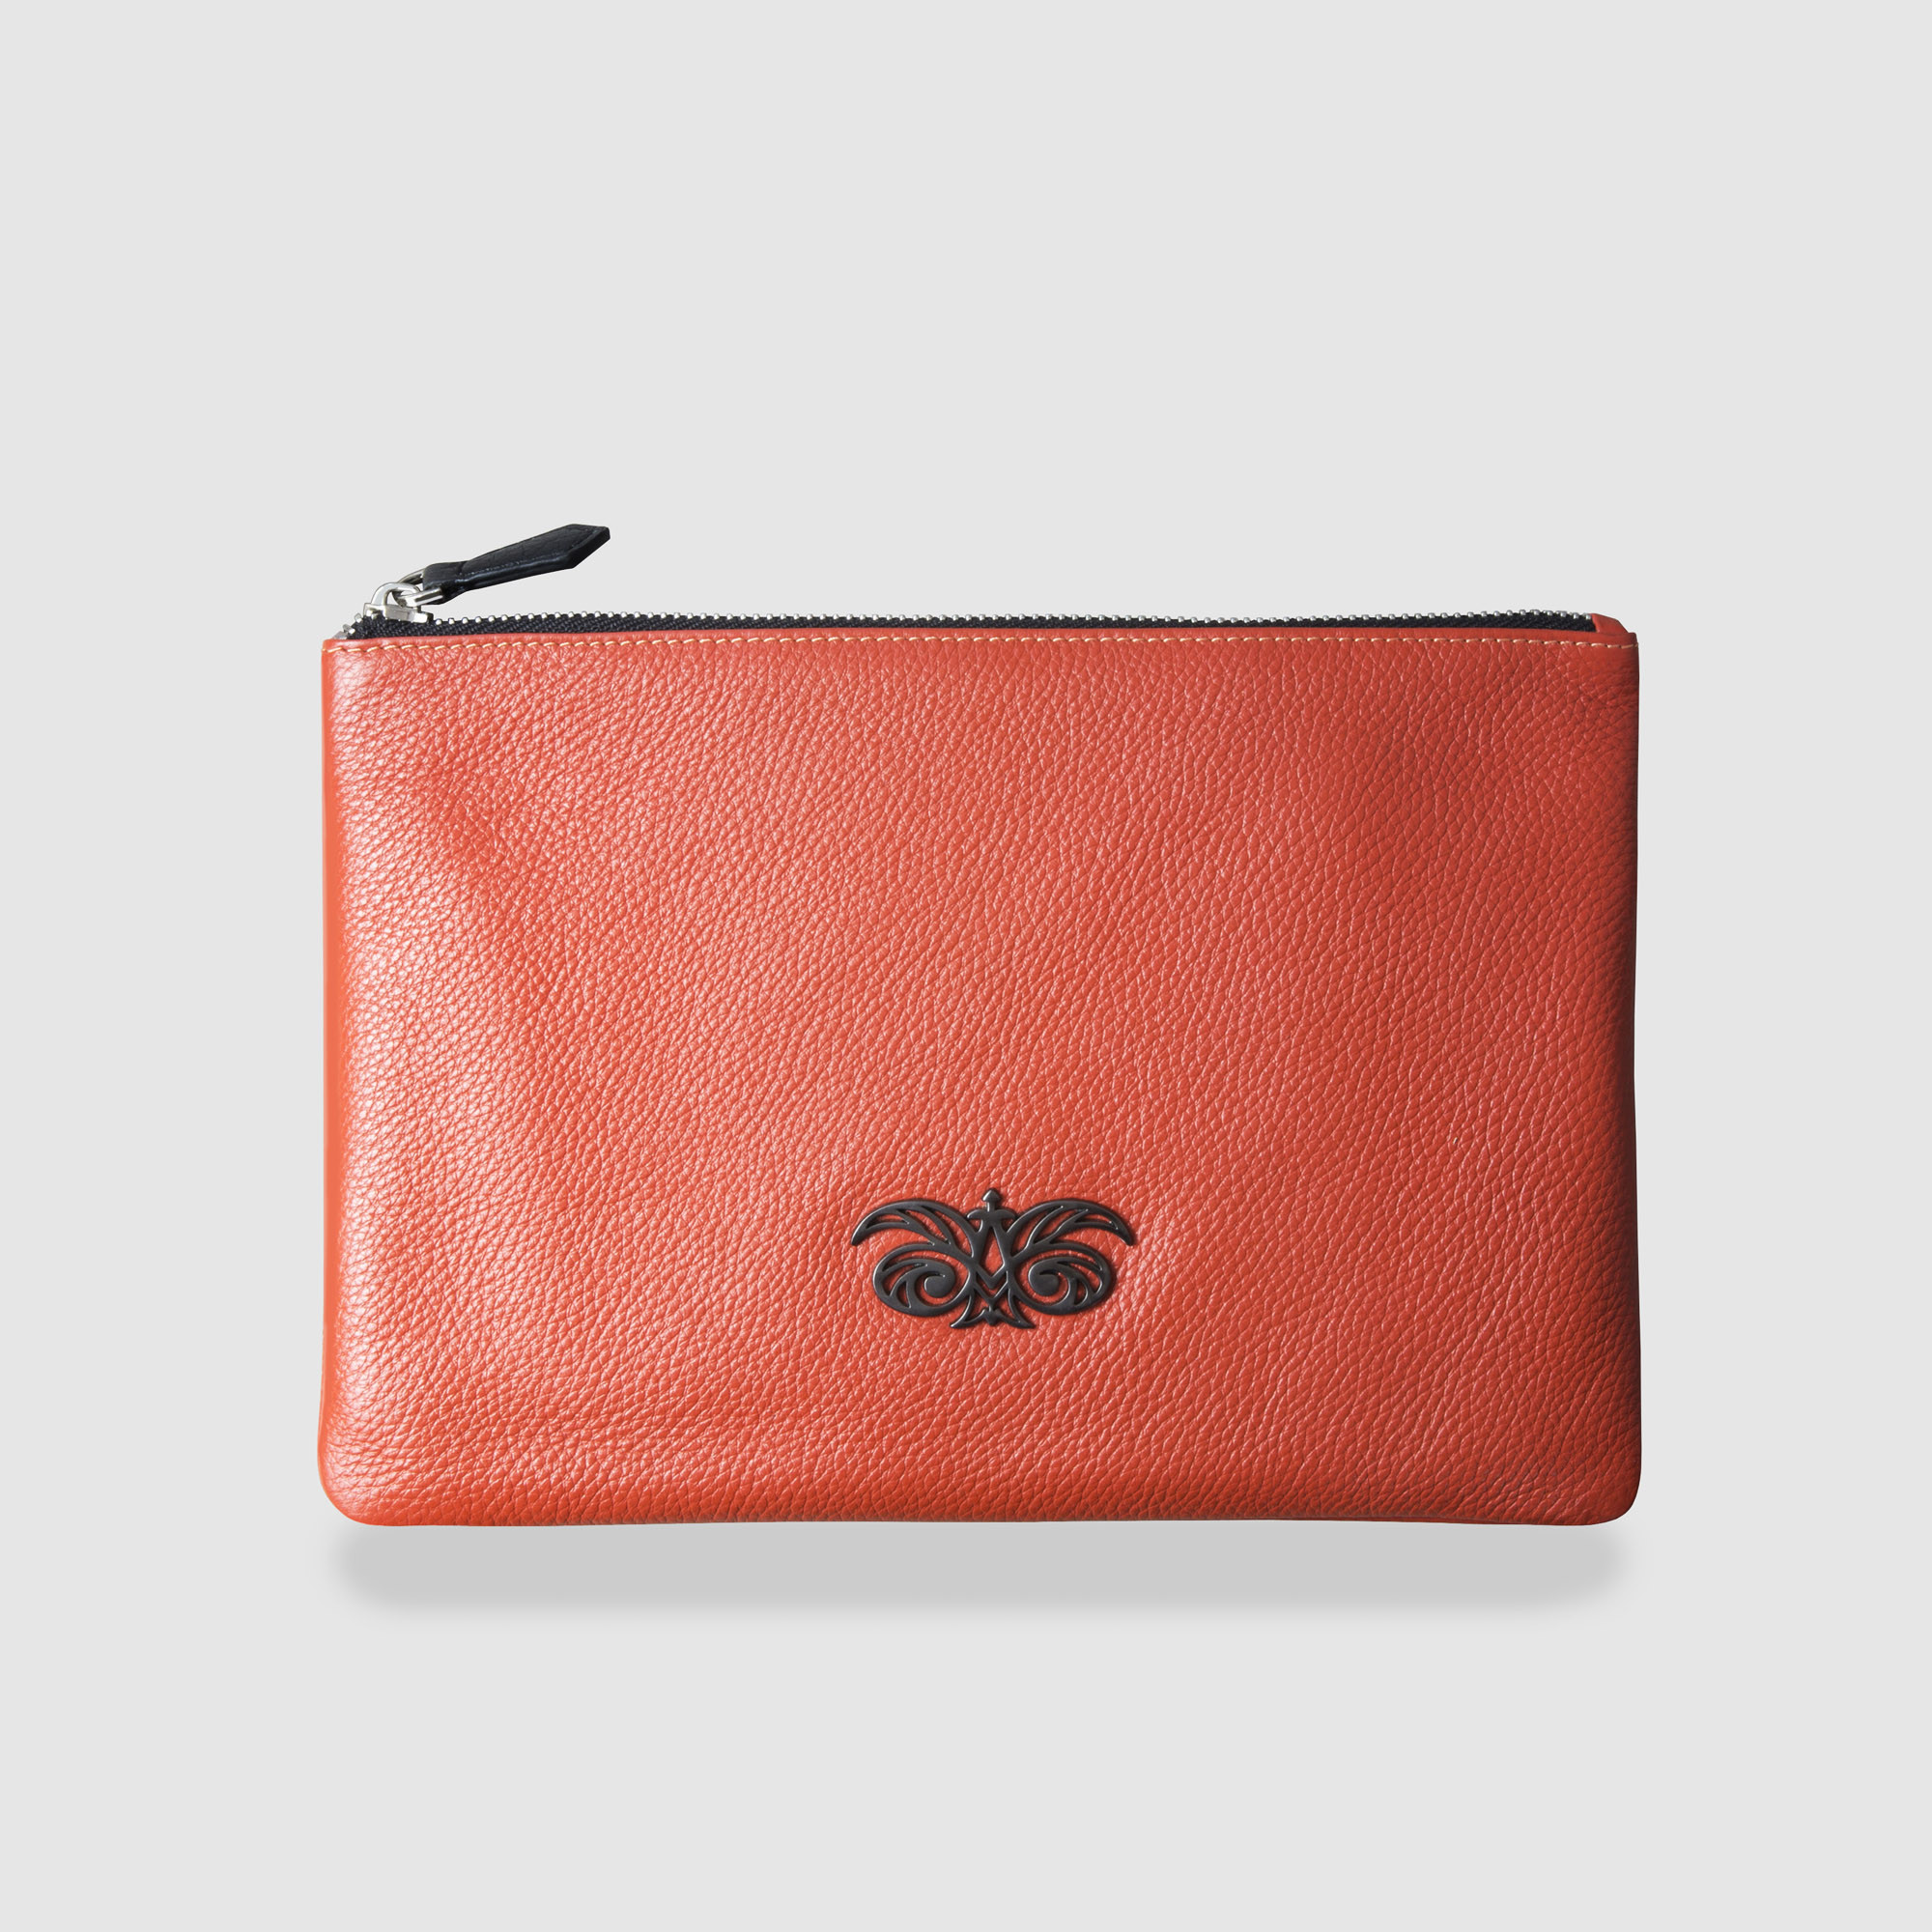 Zipper pouch OSLO in grained calfskin, orange color and light beige satin lining - front view